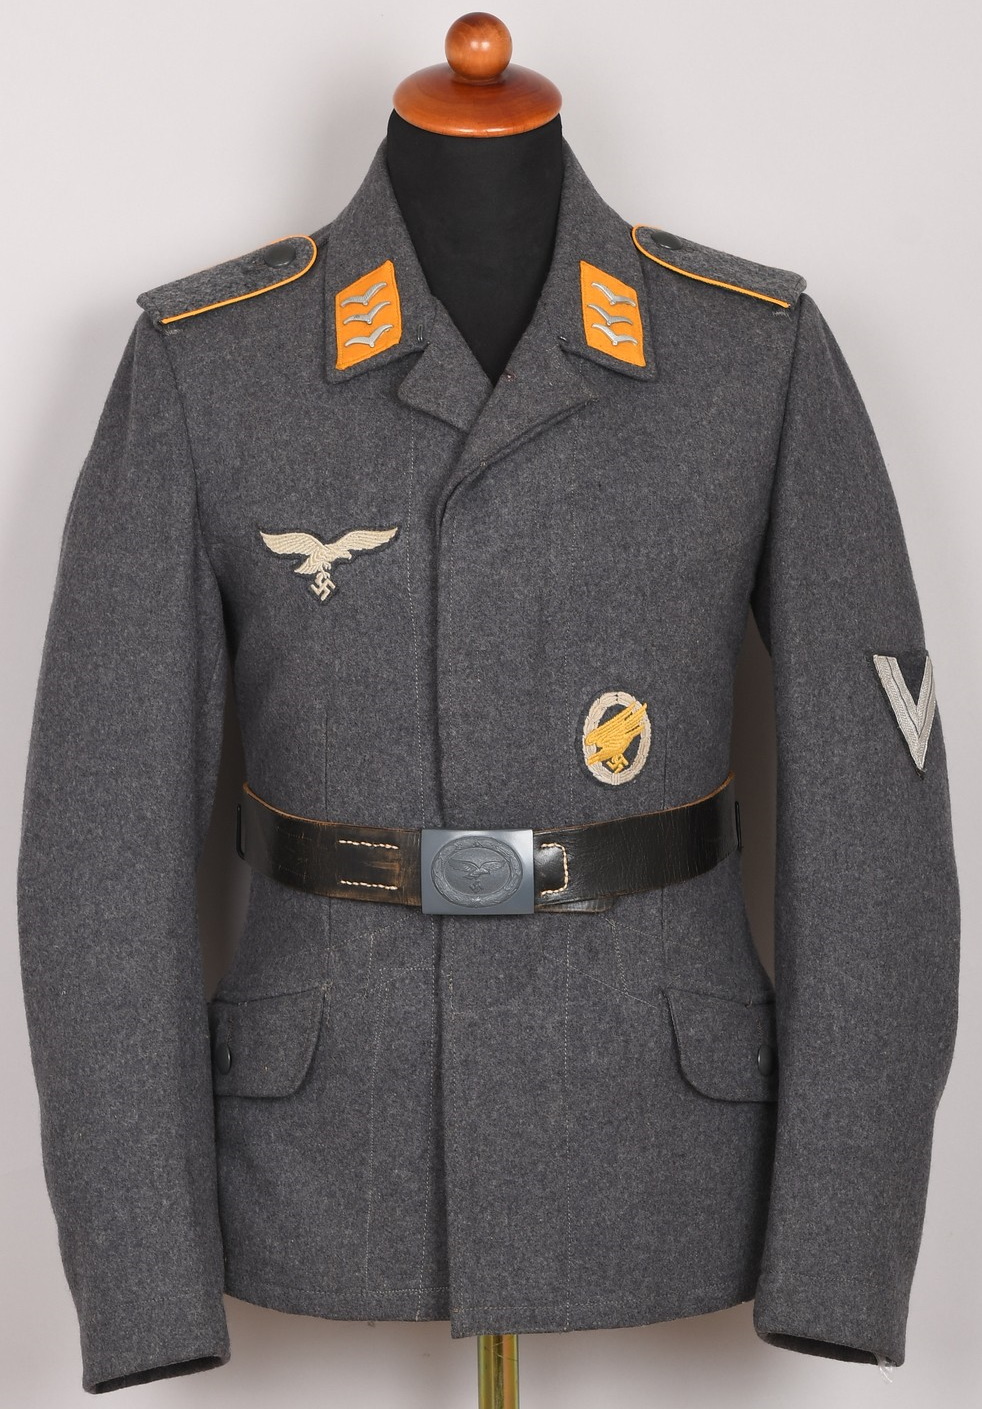 Luftwaffe Paratroopers Obergrefreiters´s Fliegerbluse.